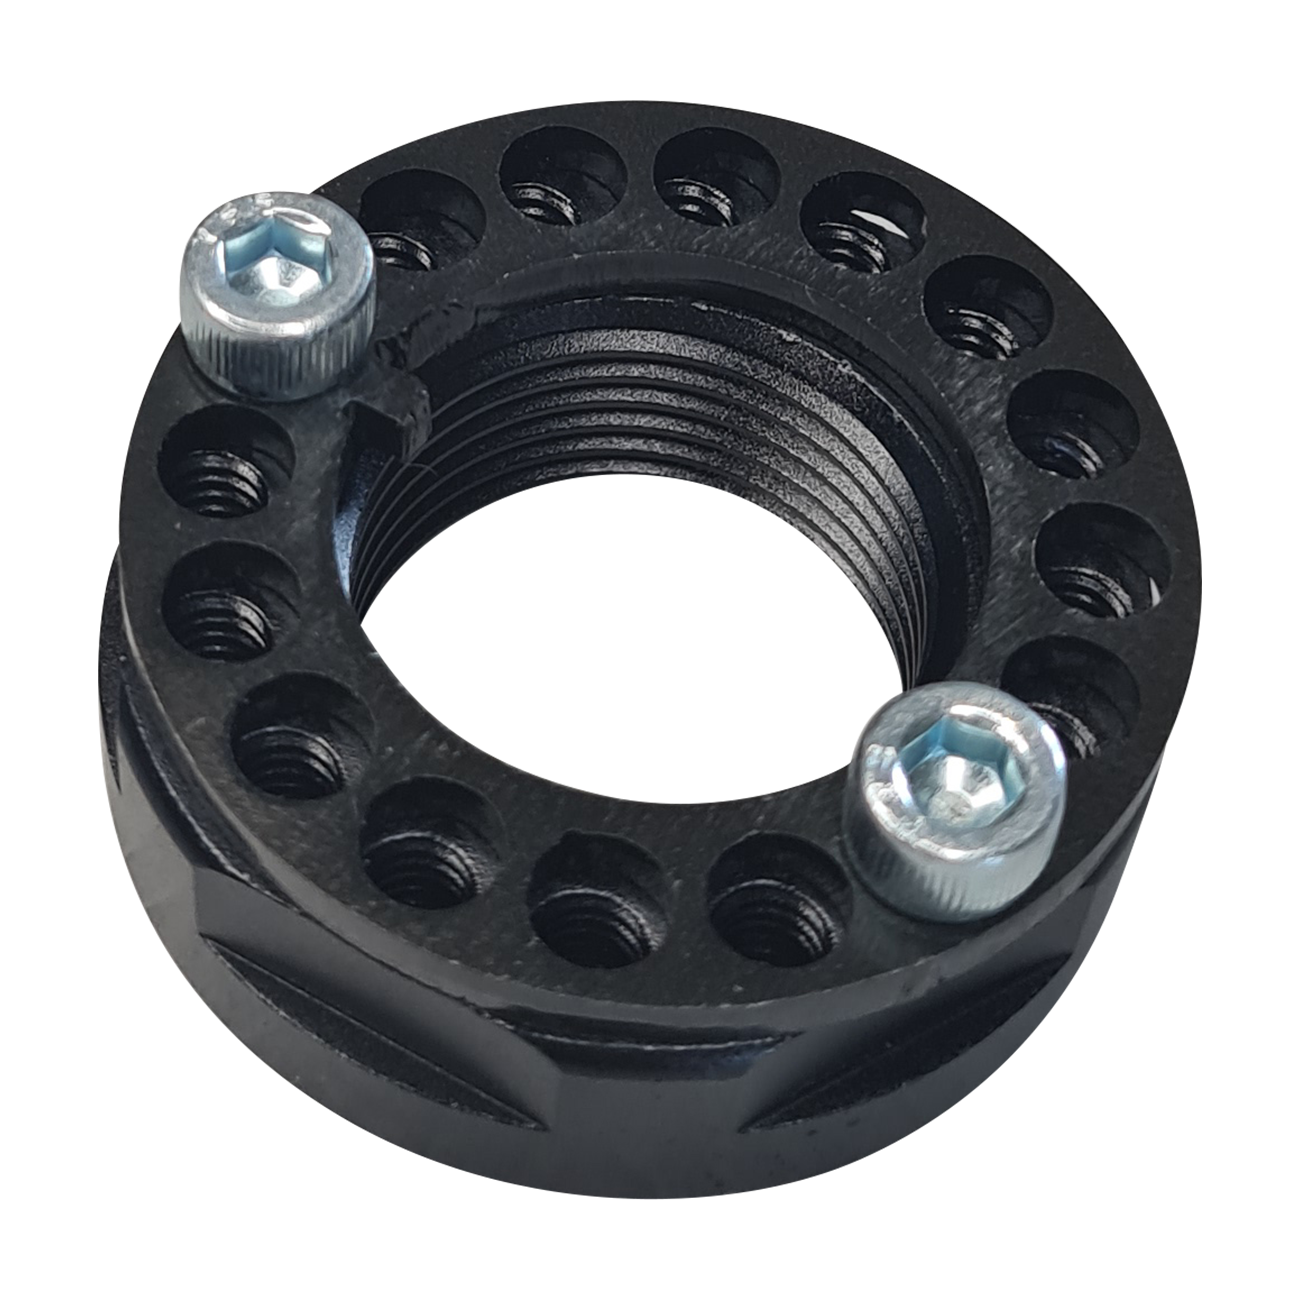 FRONT WHEEL NUT ASSEMBLY